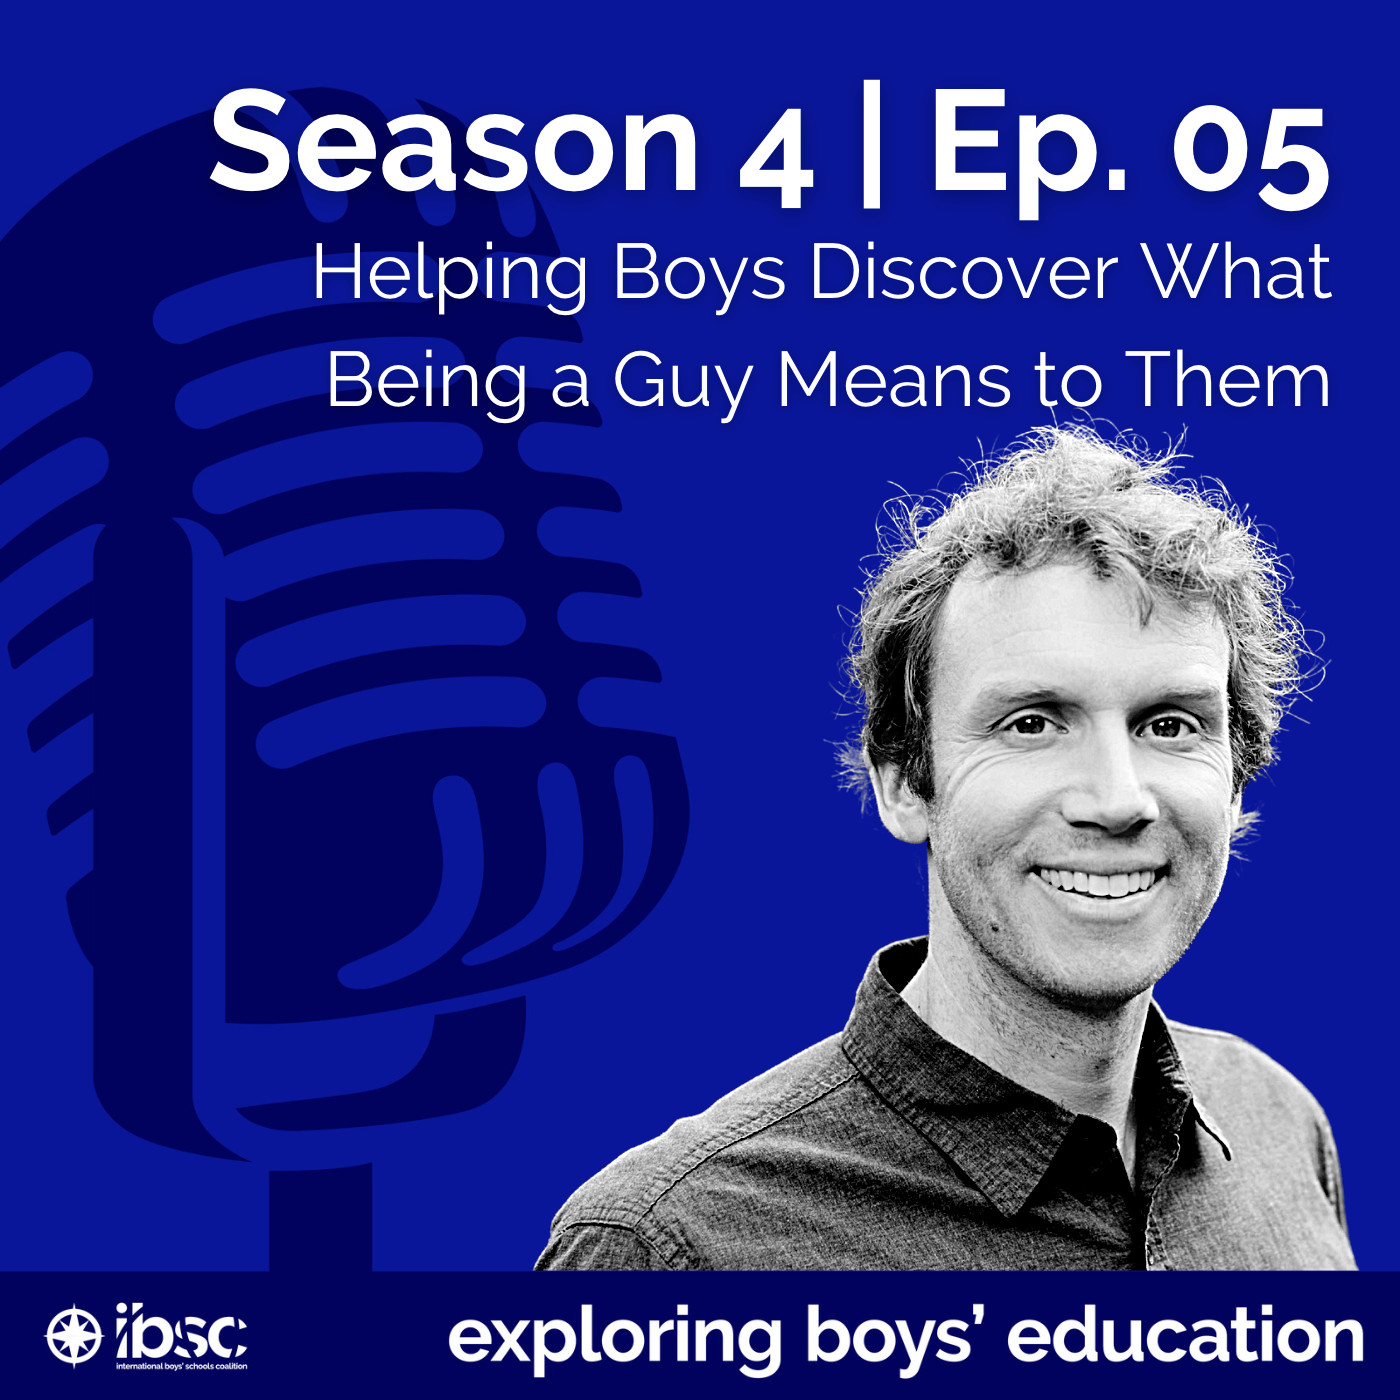 S4/Ep.05 - Helping Boys Discover What Being a Guy Means to Them